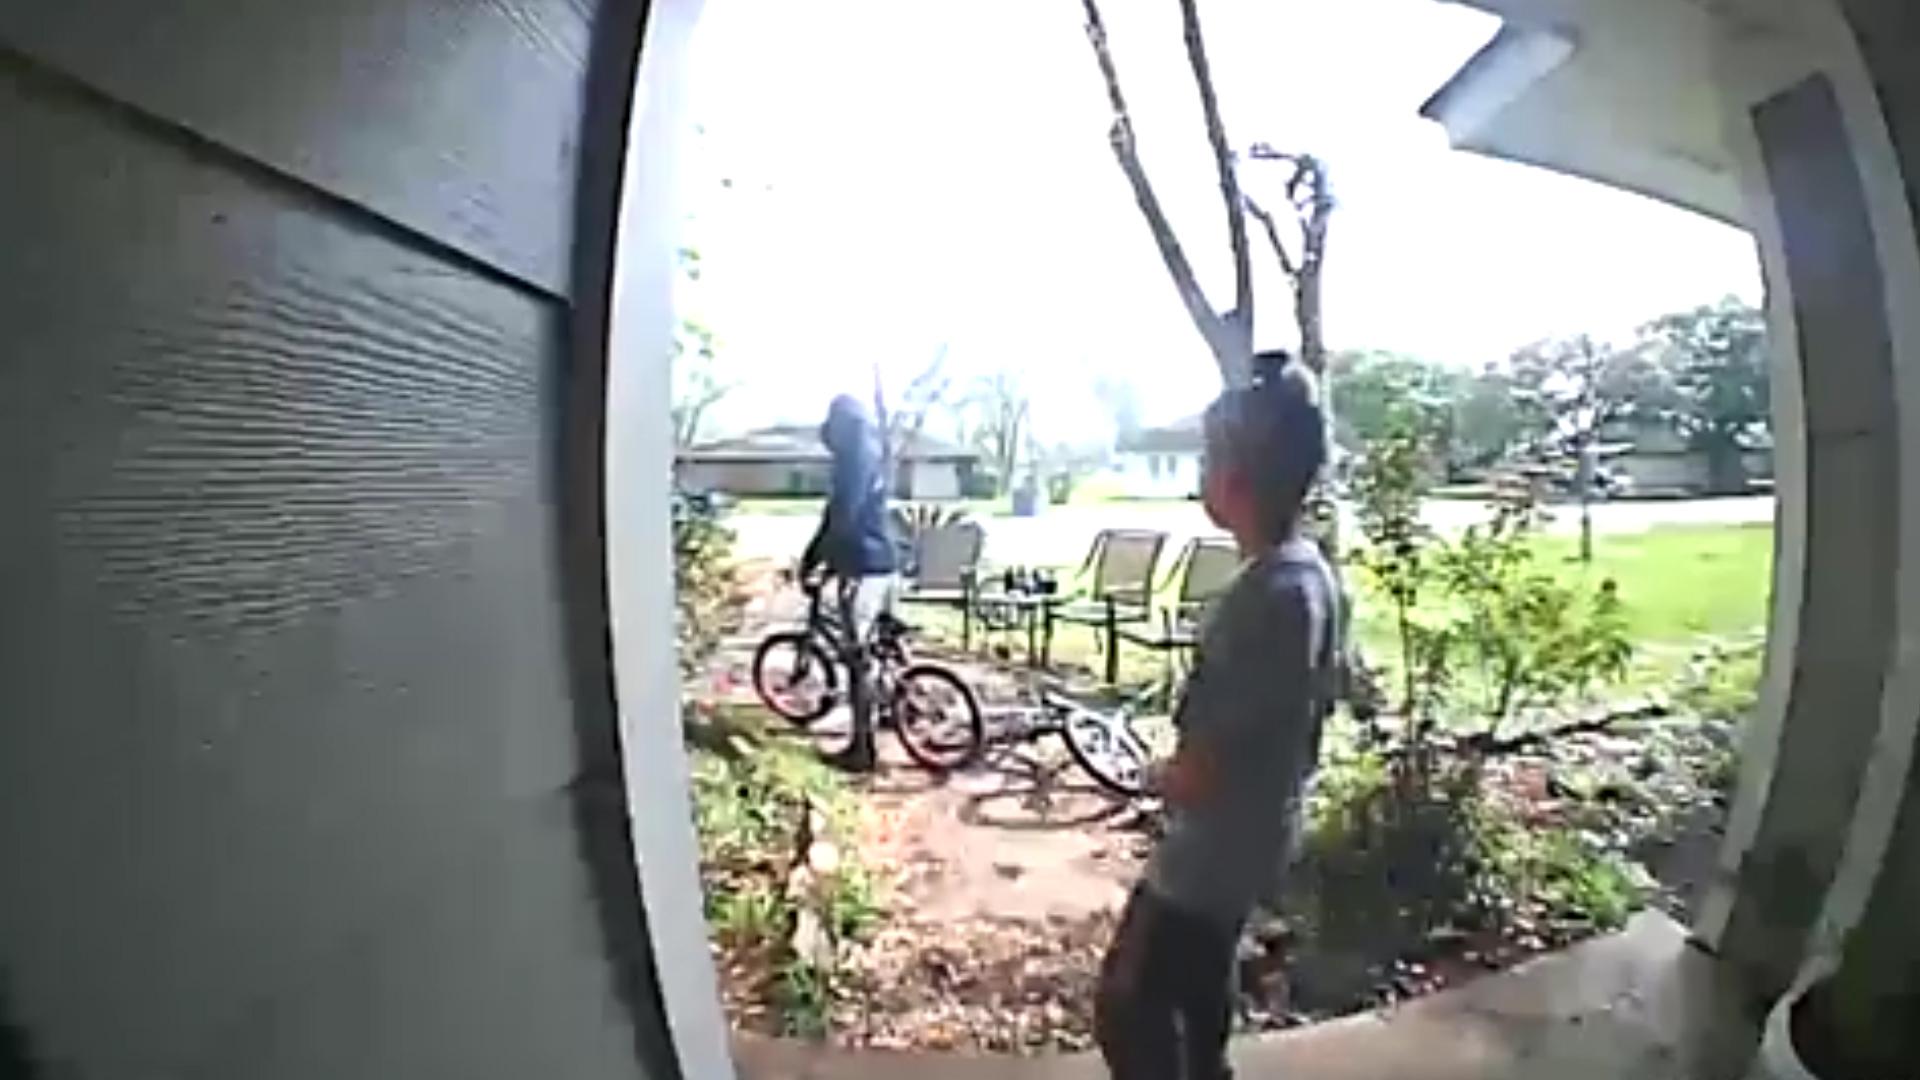 Man caught on CCTV stealing young boy's bike in front of him